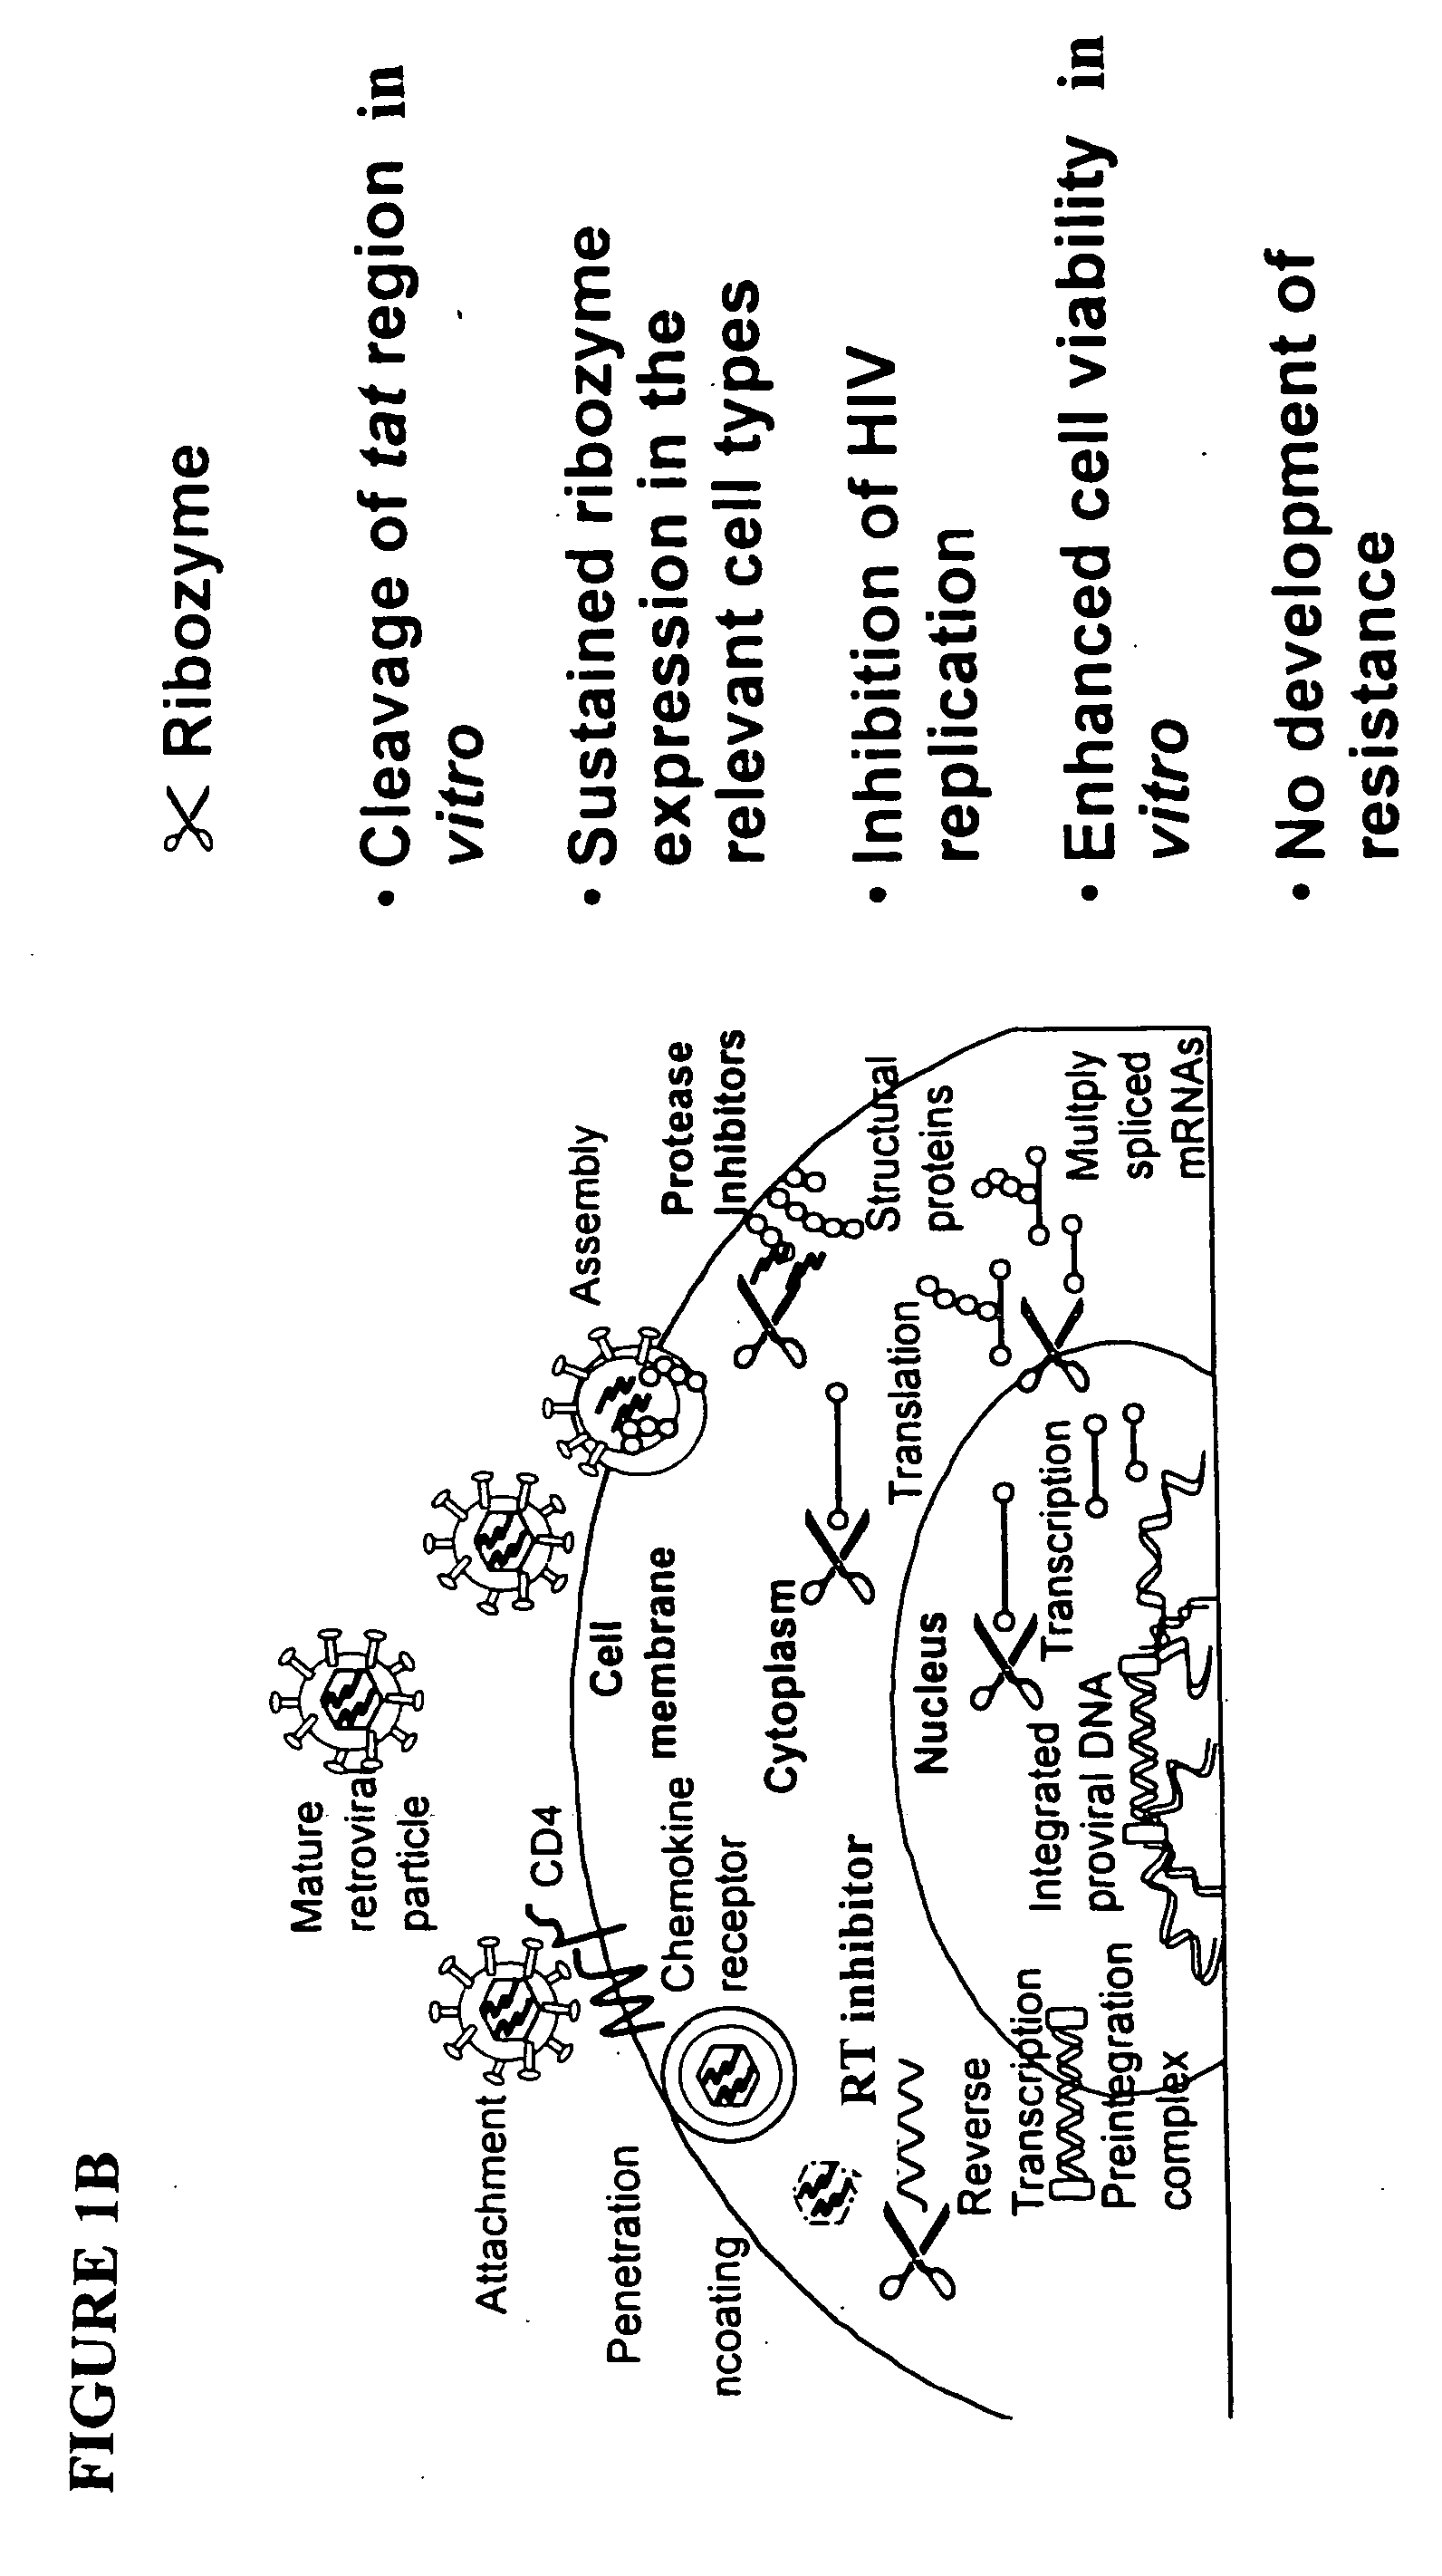 Methods for genetic modification of hematopietic progenitor cells and uses of the modified cells